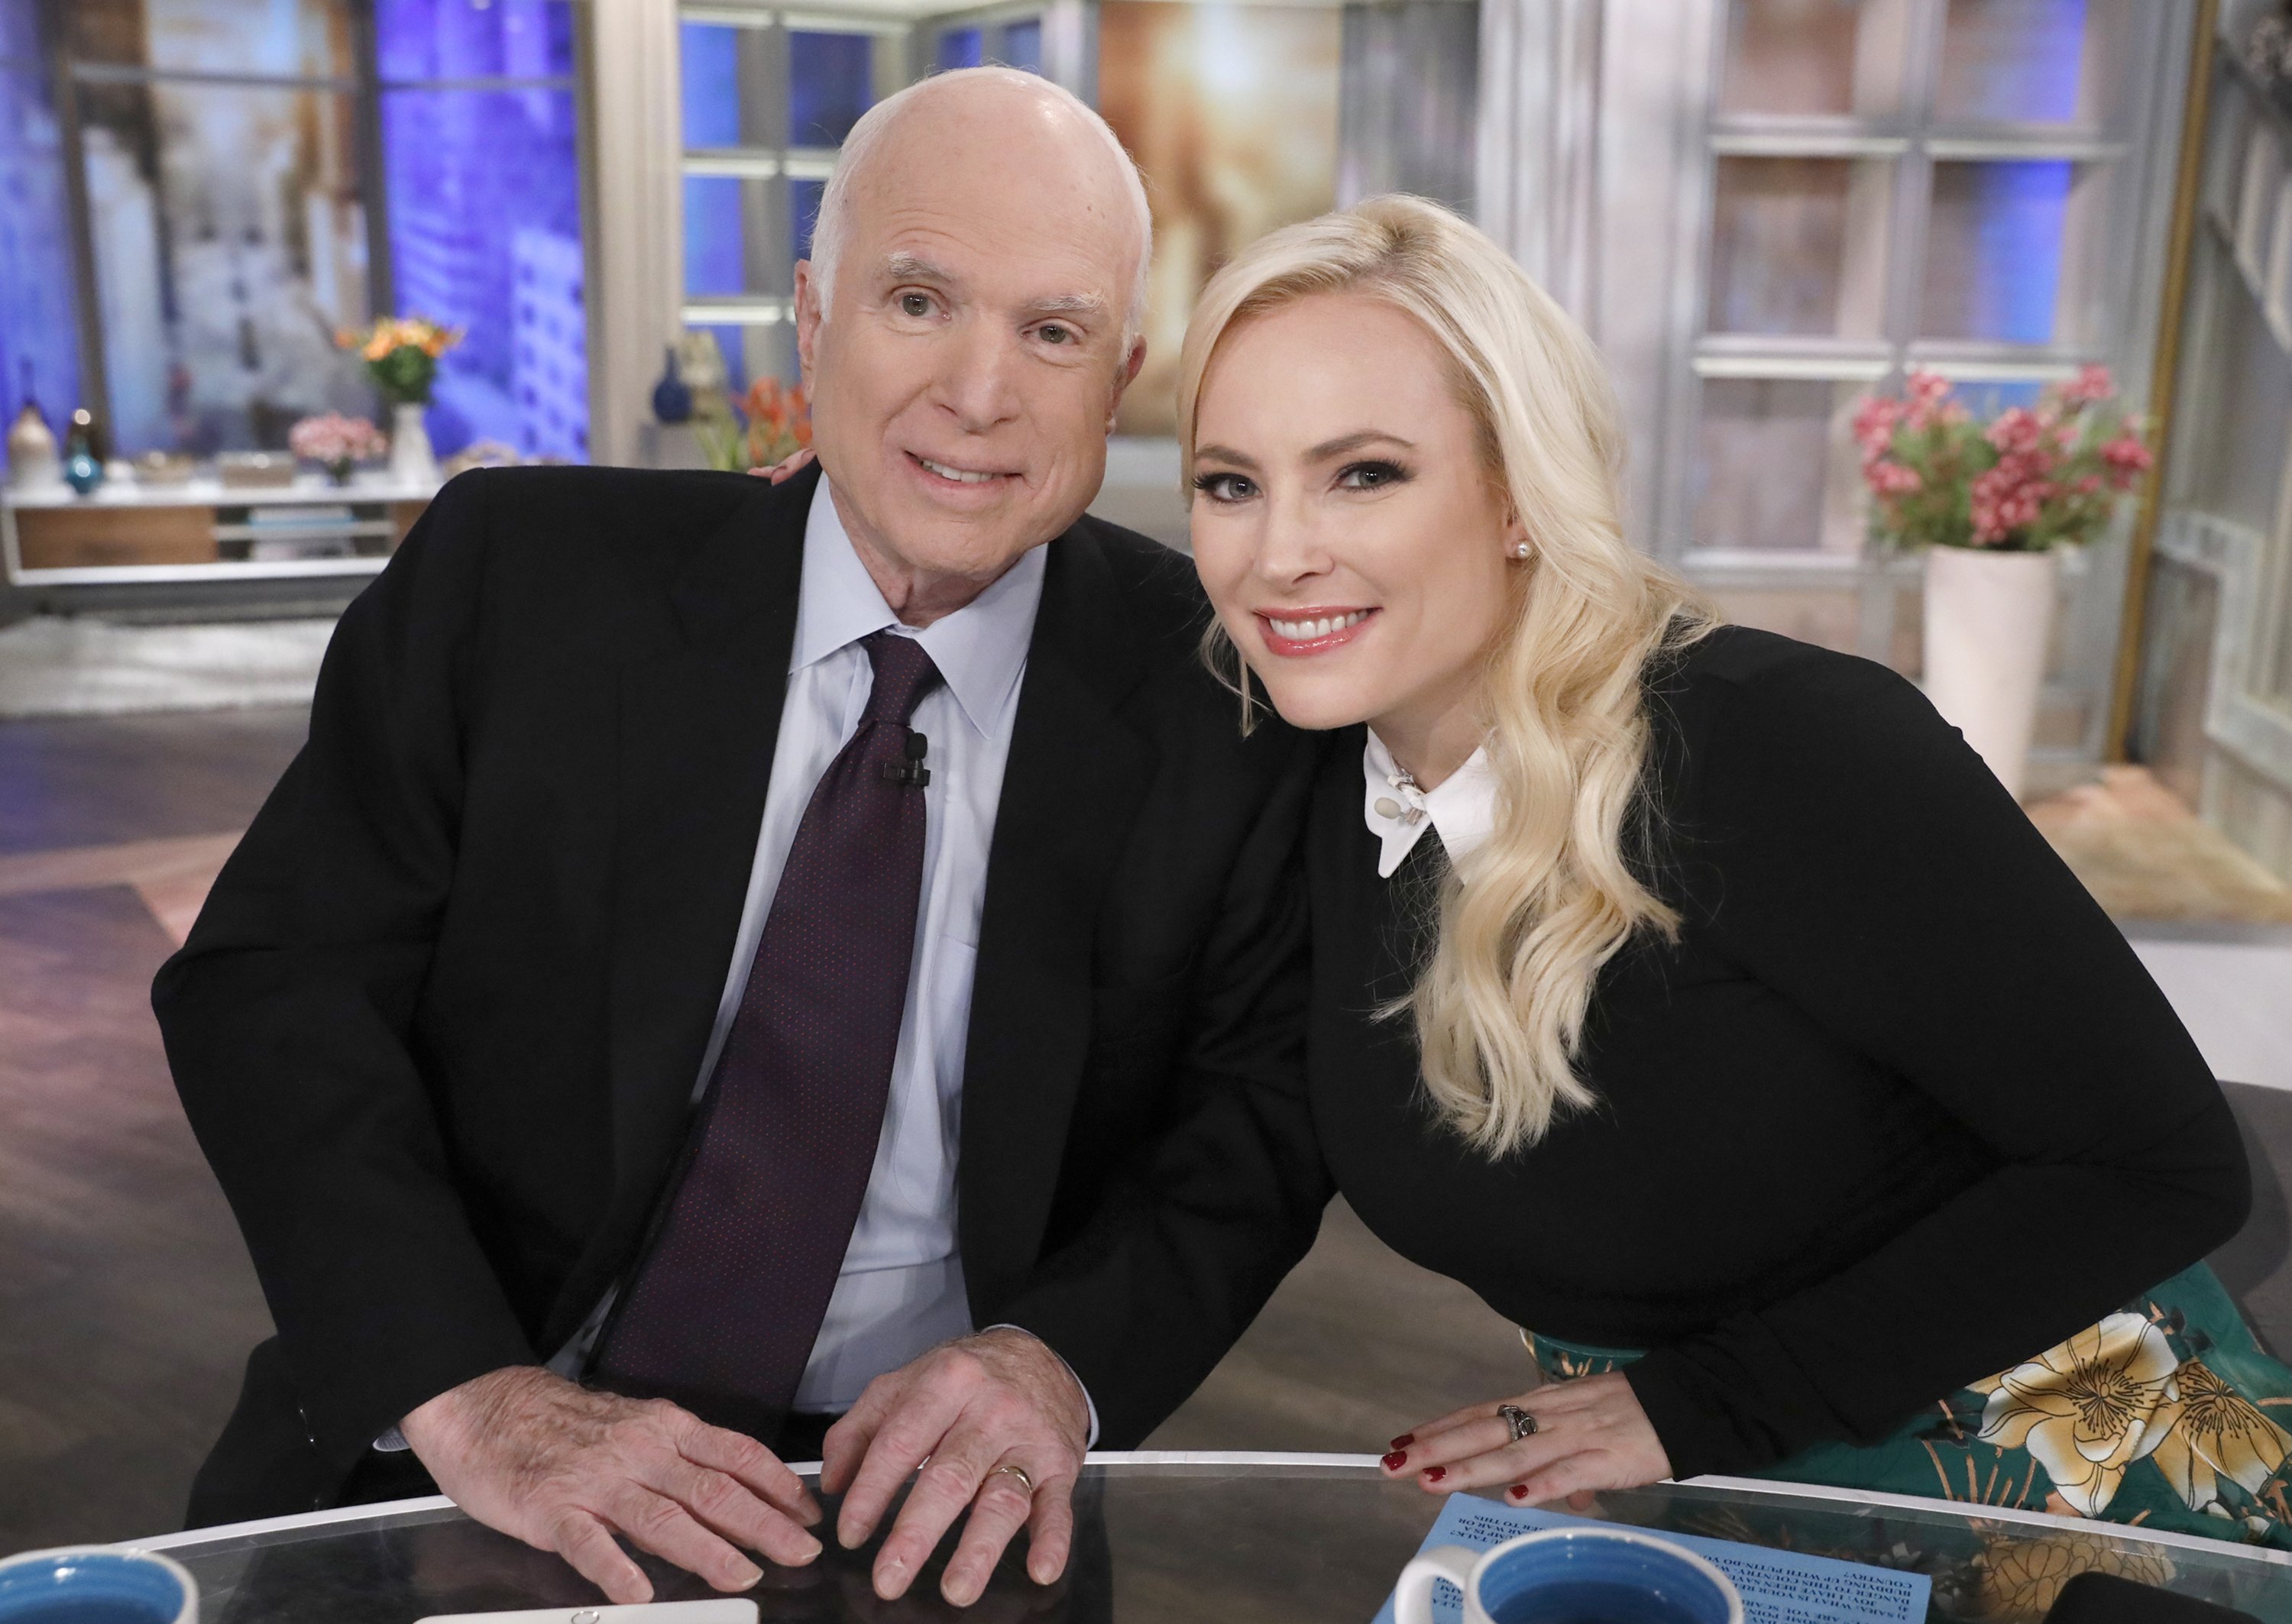 Senator John McCain, Meghan McCain on 'The View', a visit for Meghan McCain's birthday, Monday, October 23, 2017 | Source : Getty Images  